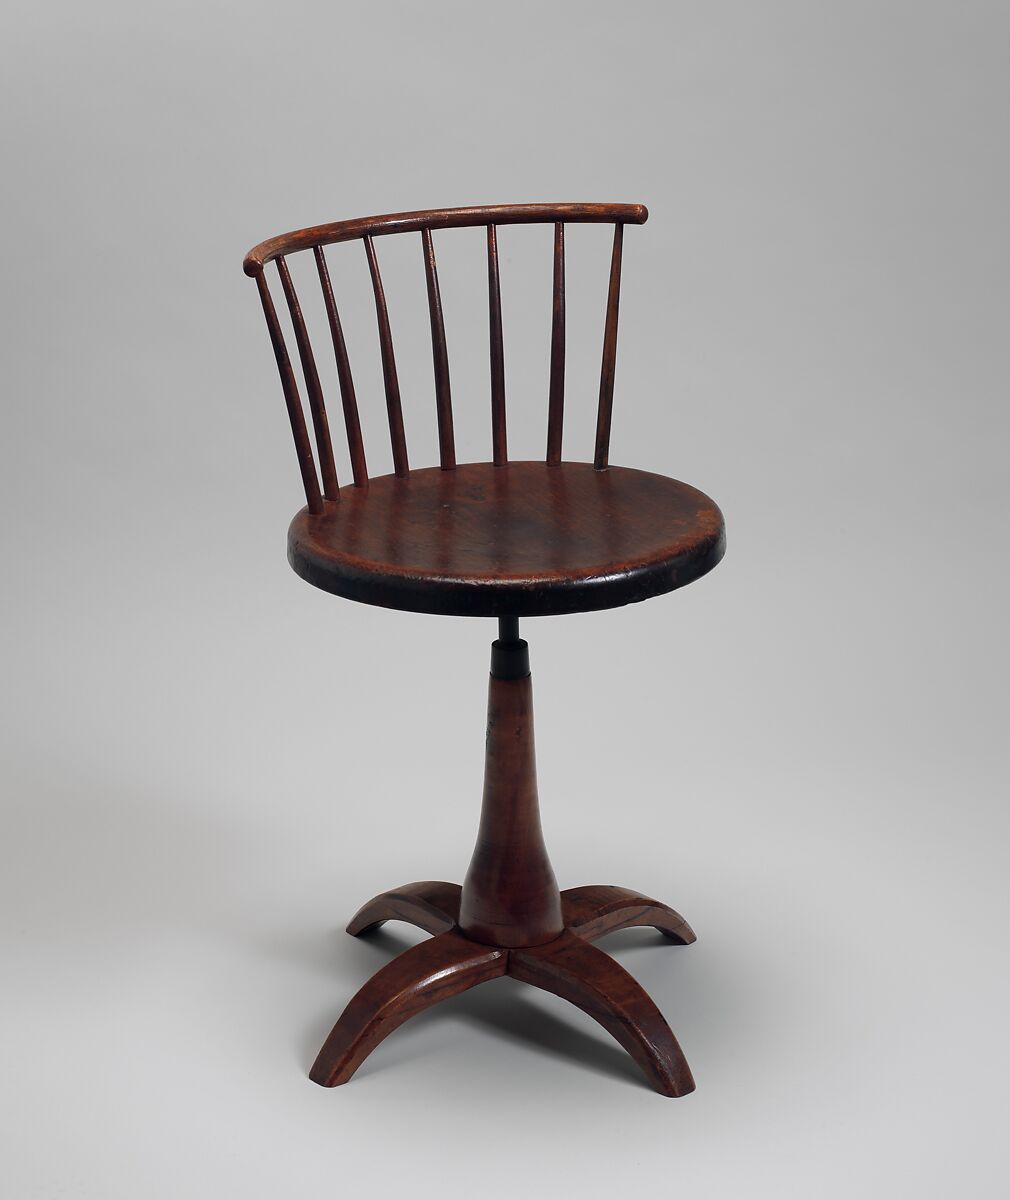 Revolving Chair, United Society of Believers in Christ’s Second Appearing (“Shakers”) (American, active ca. 1750–present), Maple, white oak, pine, birch, American, Shaker 